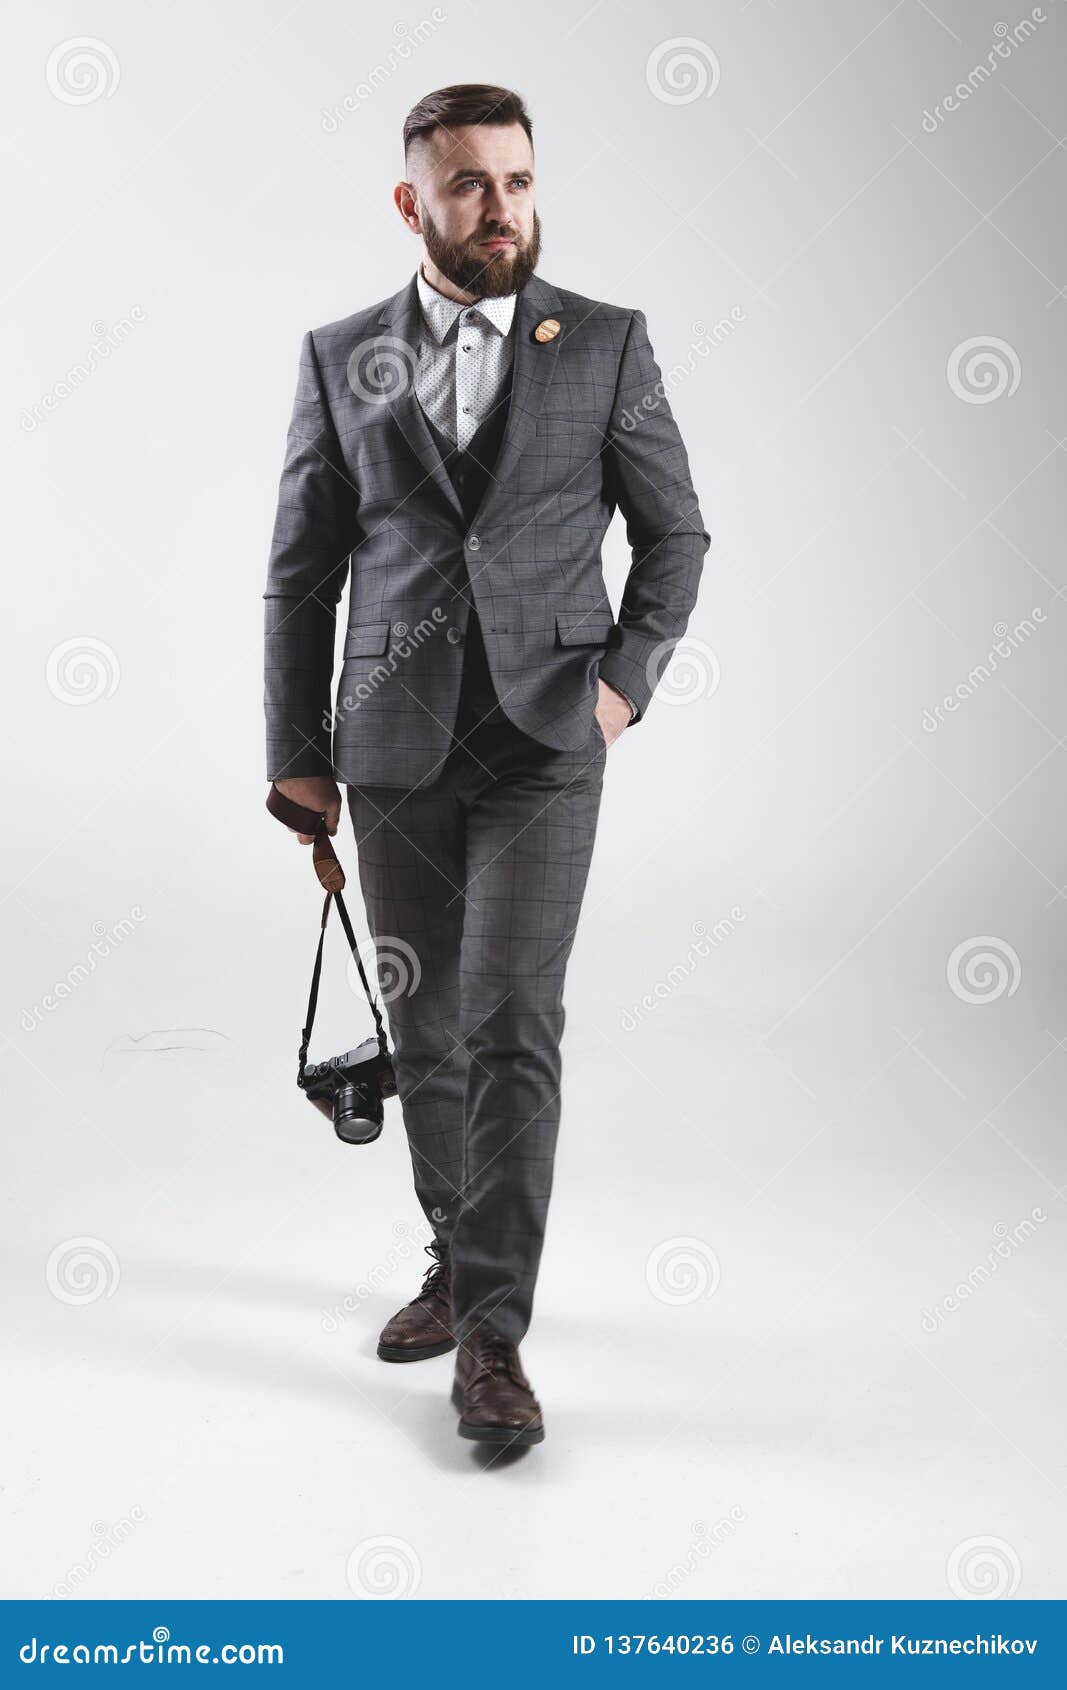 Fashion Man In Suit On White Background Stock Photo - Image of